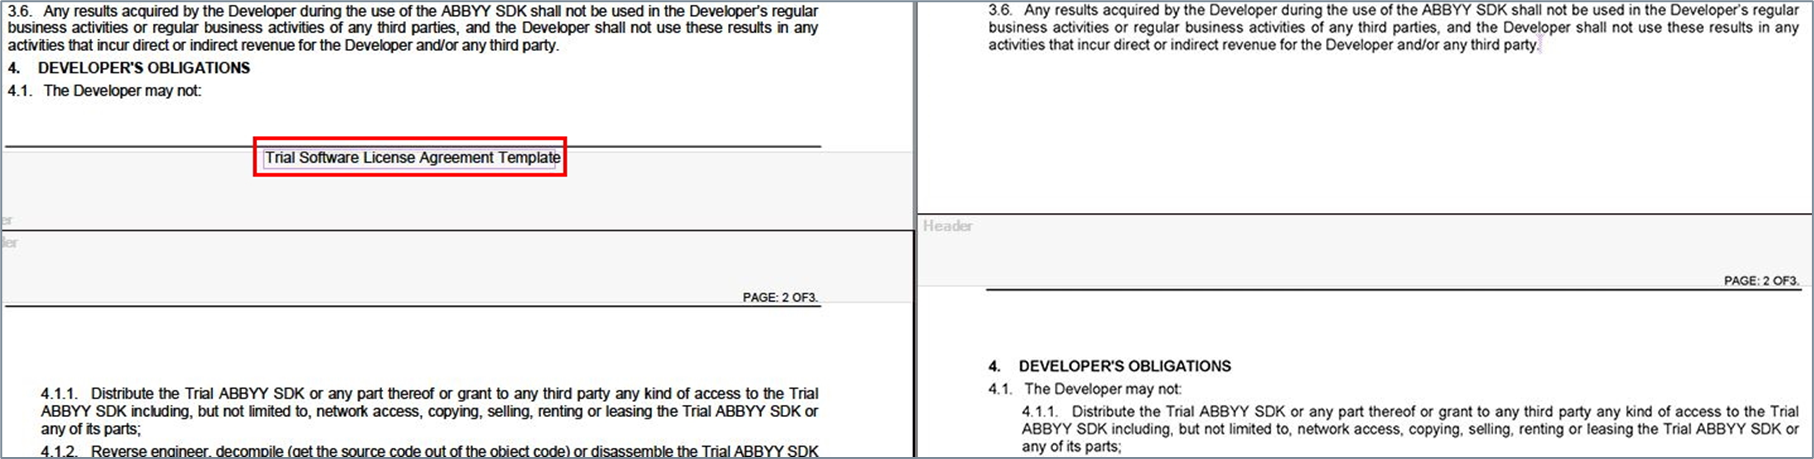 compare PDFs for differences